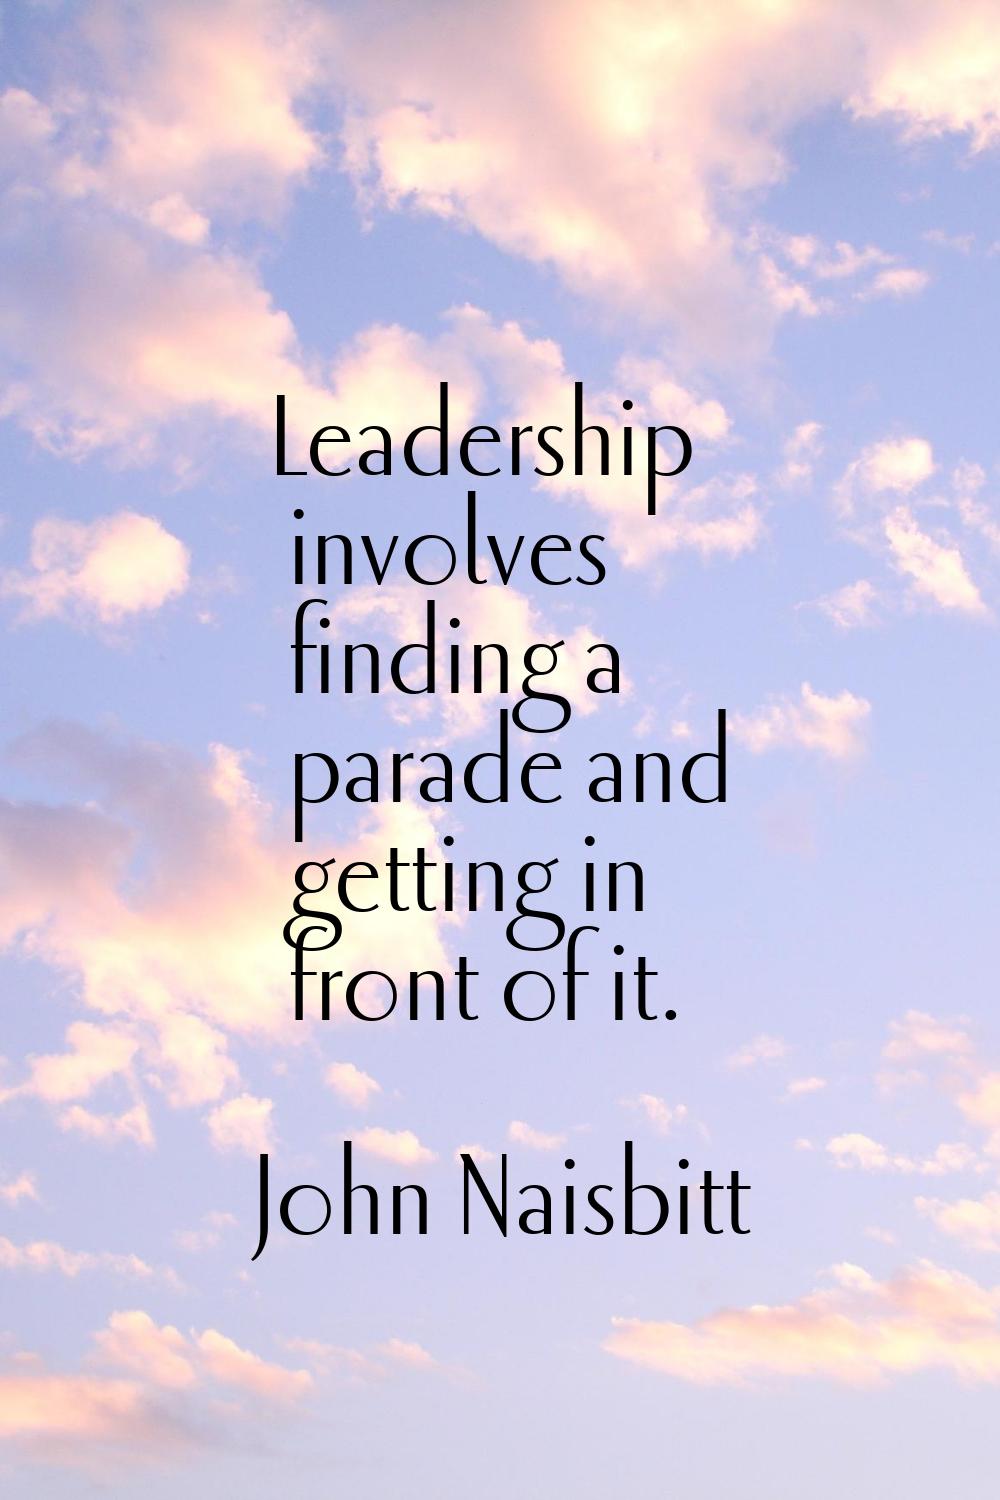 Leadership involves finding a parade and getting in front of it.